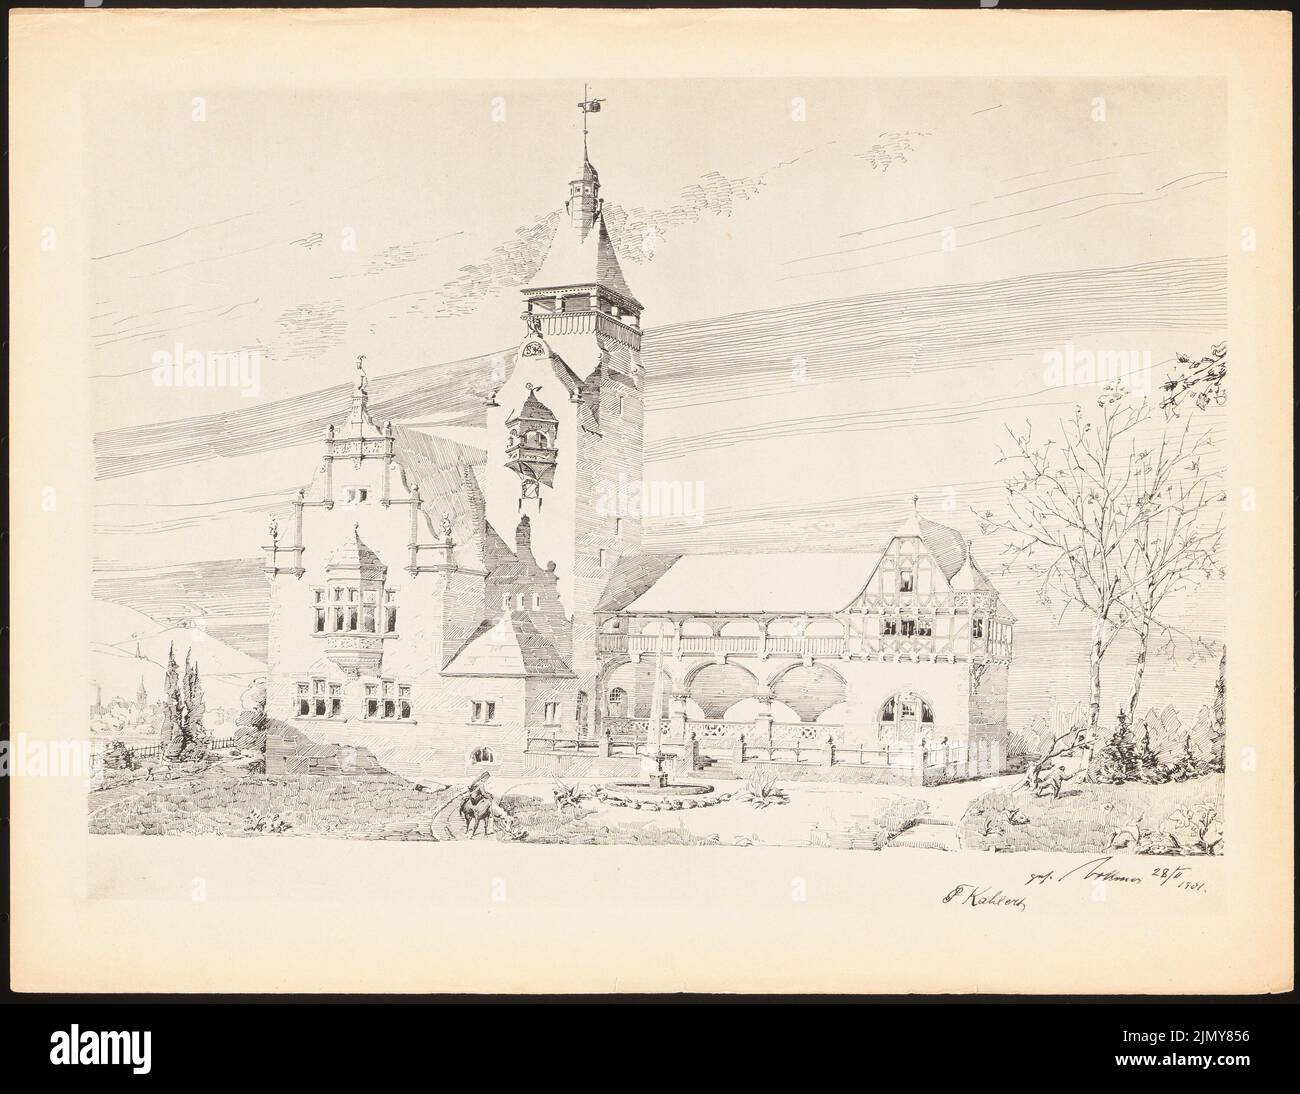 Kahlert F., country house. (From: Prints of seminar works by the Royal Technical University of Berlin, Vol. II) (February 28, 1901): Perspective view. Print on paper, 25.5 x 33 cm (including scan edges) Stock Photo